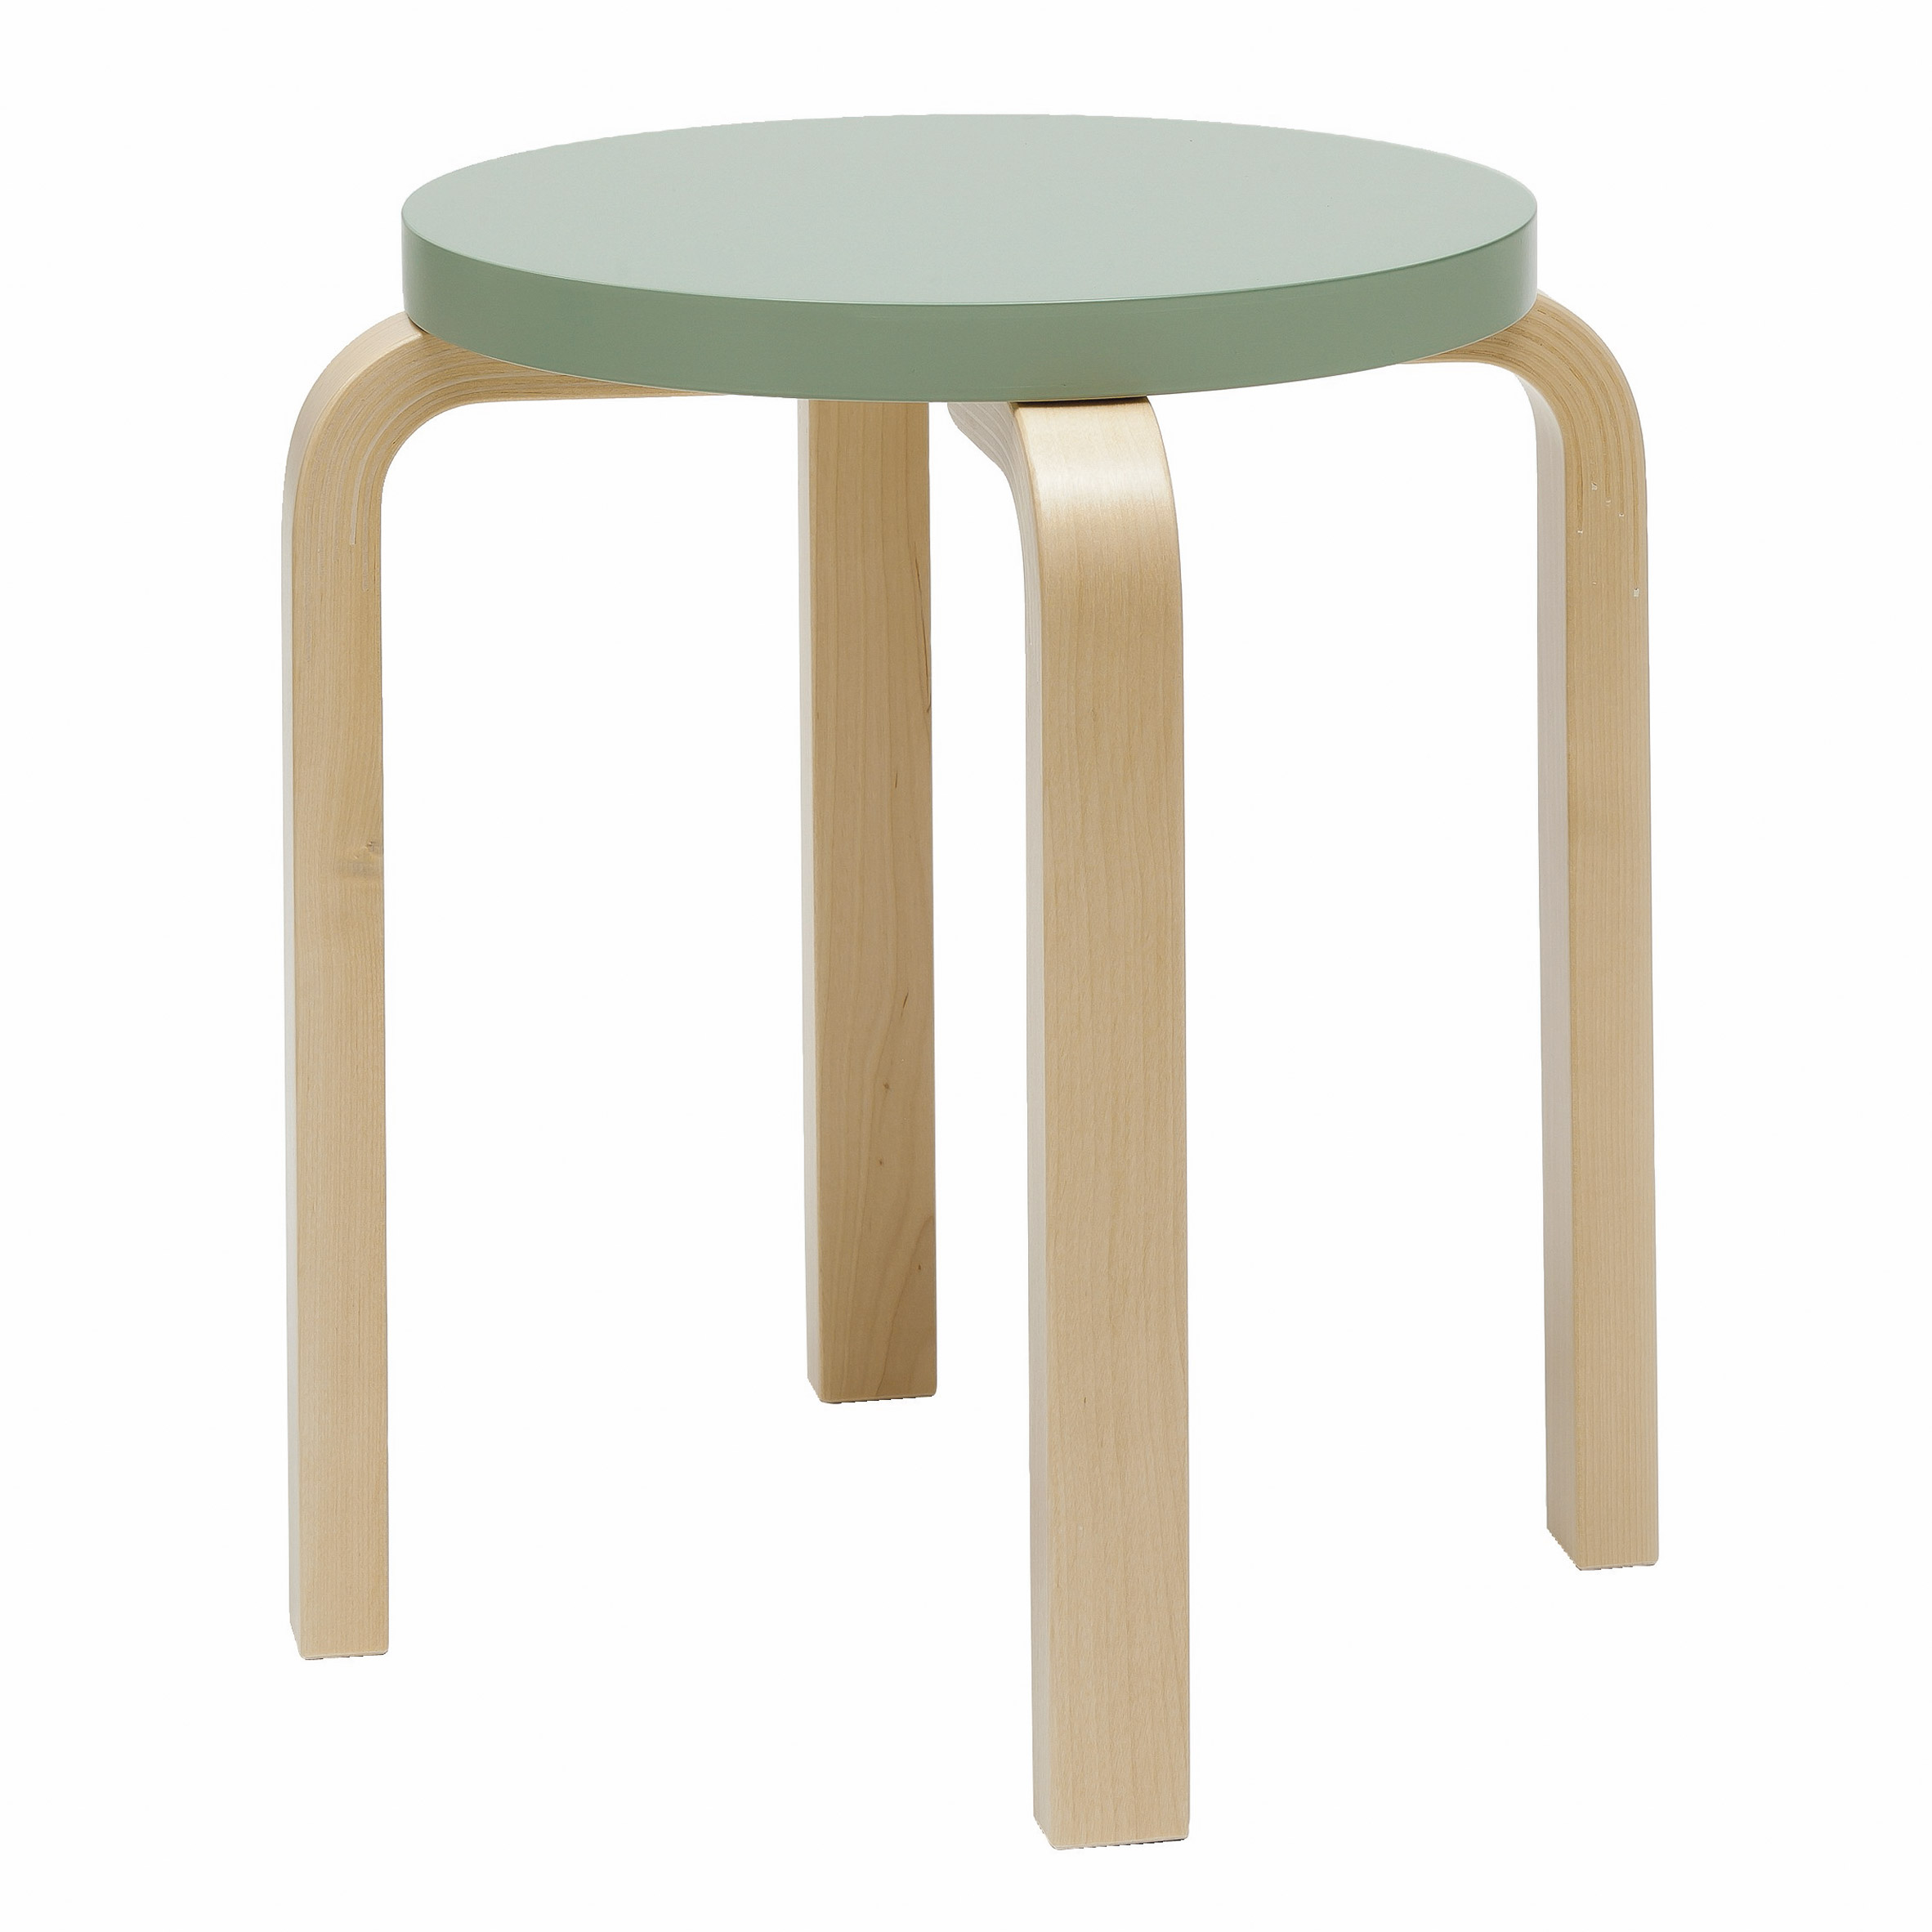 Christmas 2018 gifts for architects and designers: Stool 60 by Arket